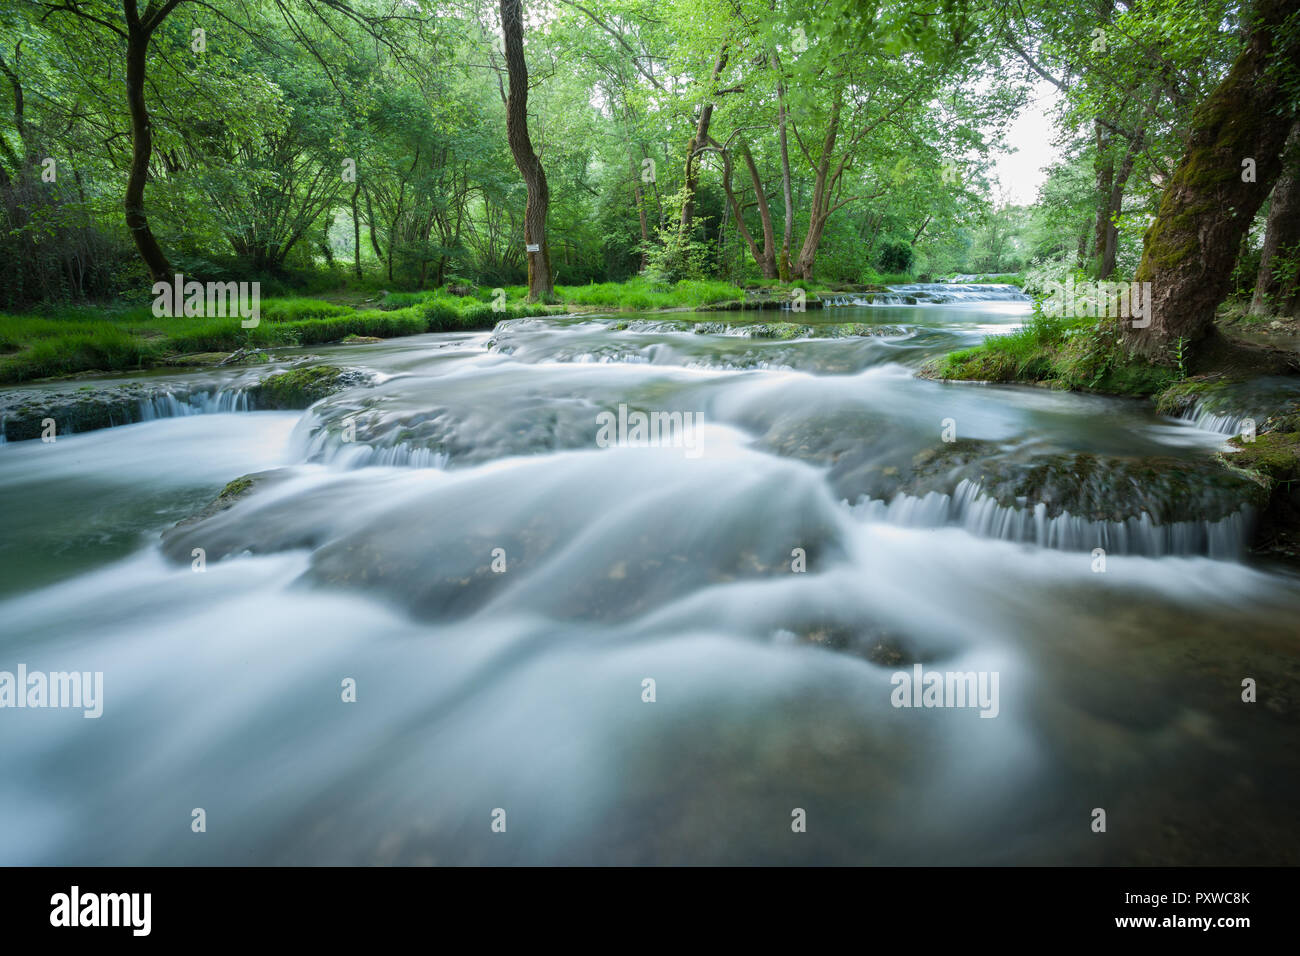 Very fast flowing river, waterfall over river stones and forest in the background Stock Photo